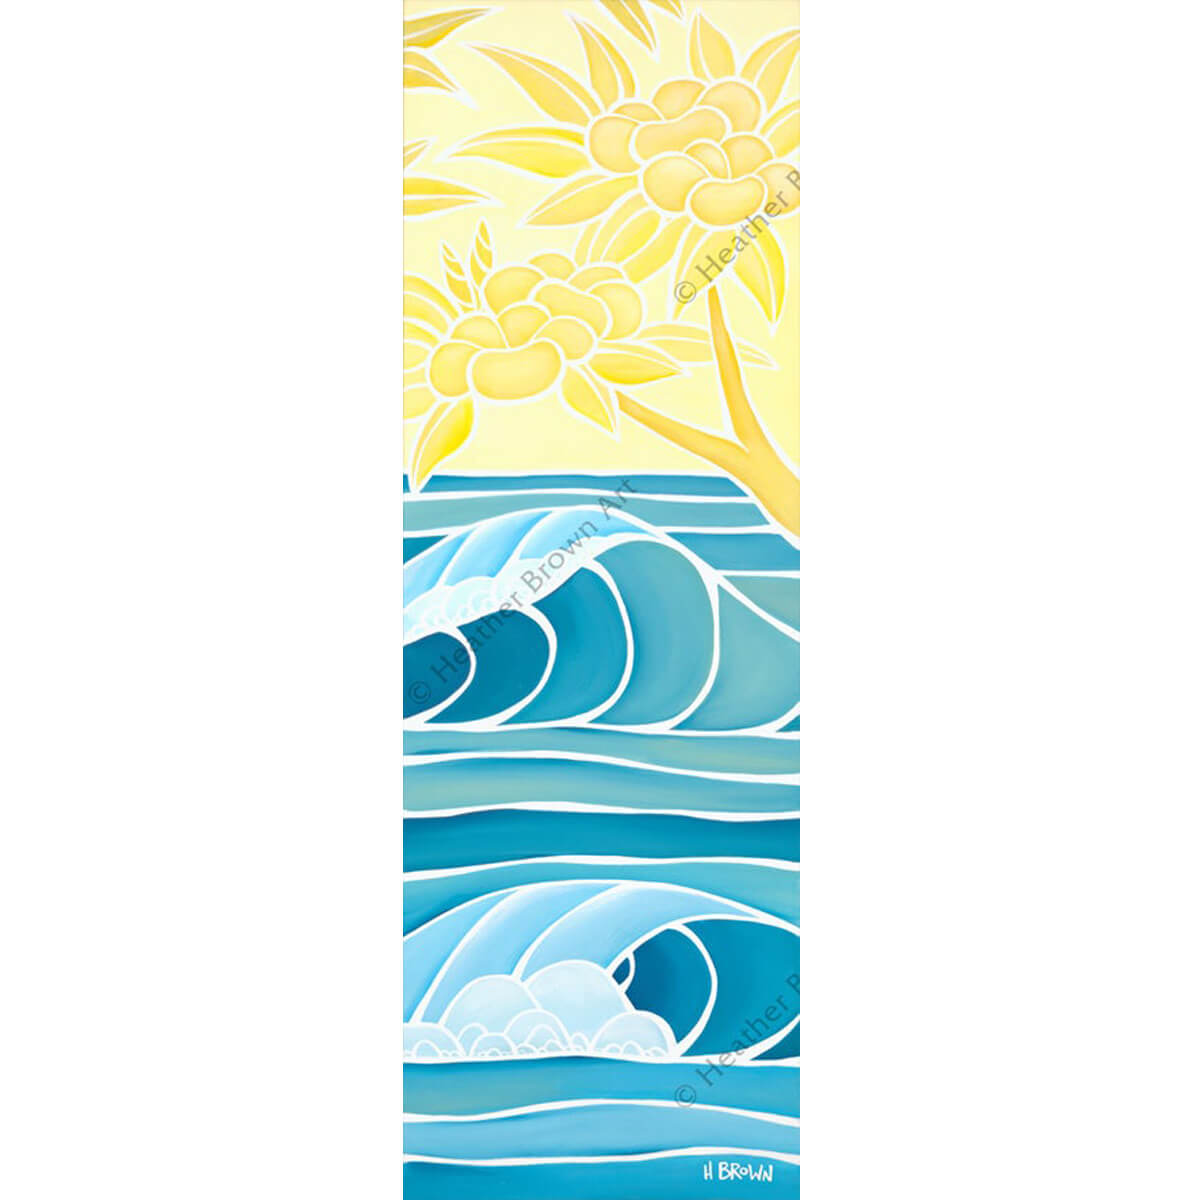 Lemon Sky by Hawaii artist Heather Brown. This painting depicts a beautiful view of the tropical ocean.